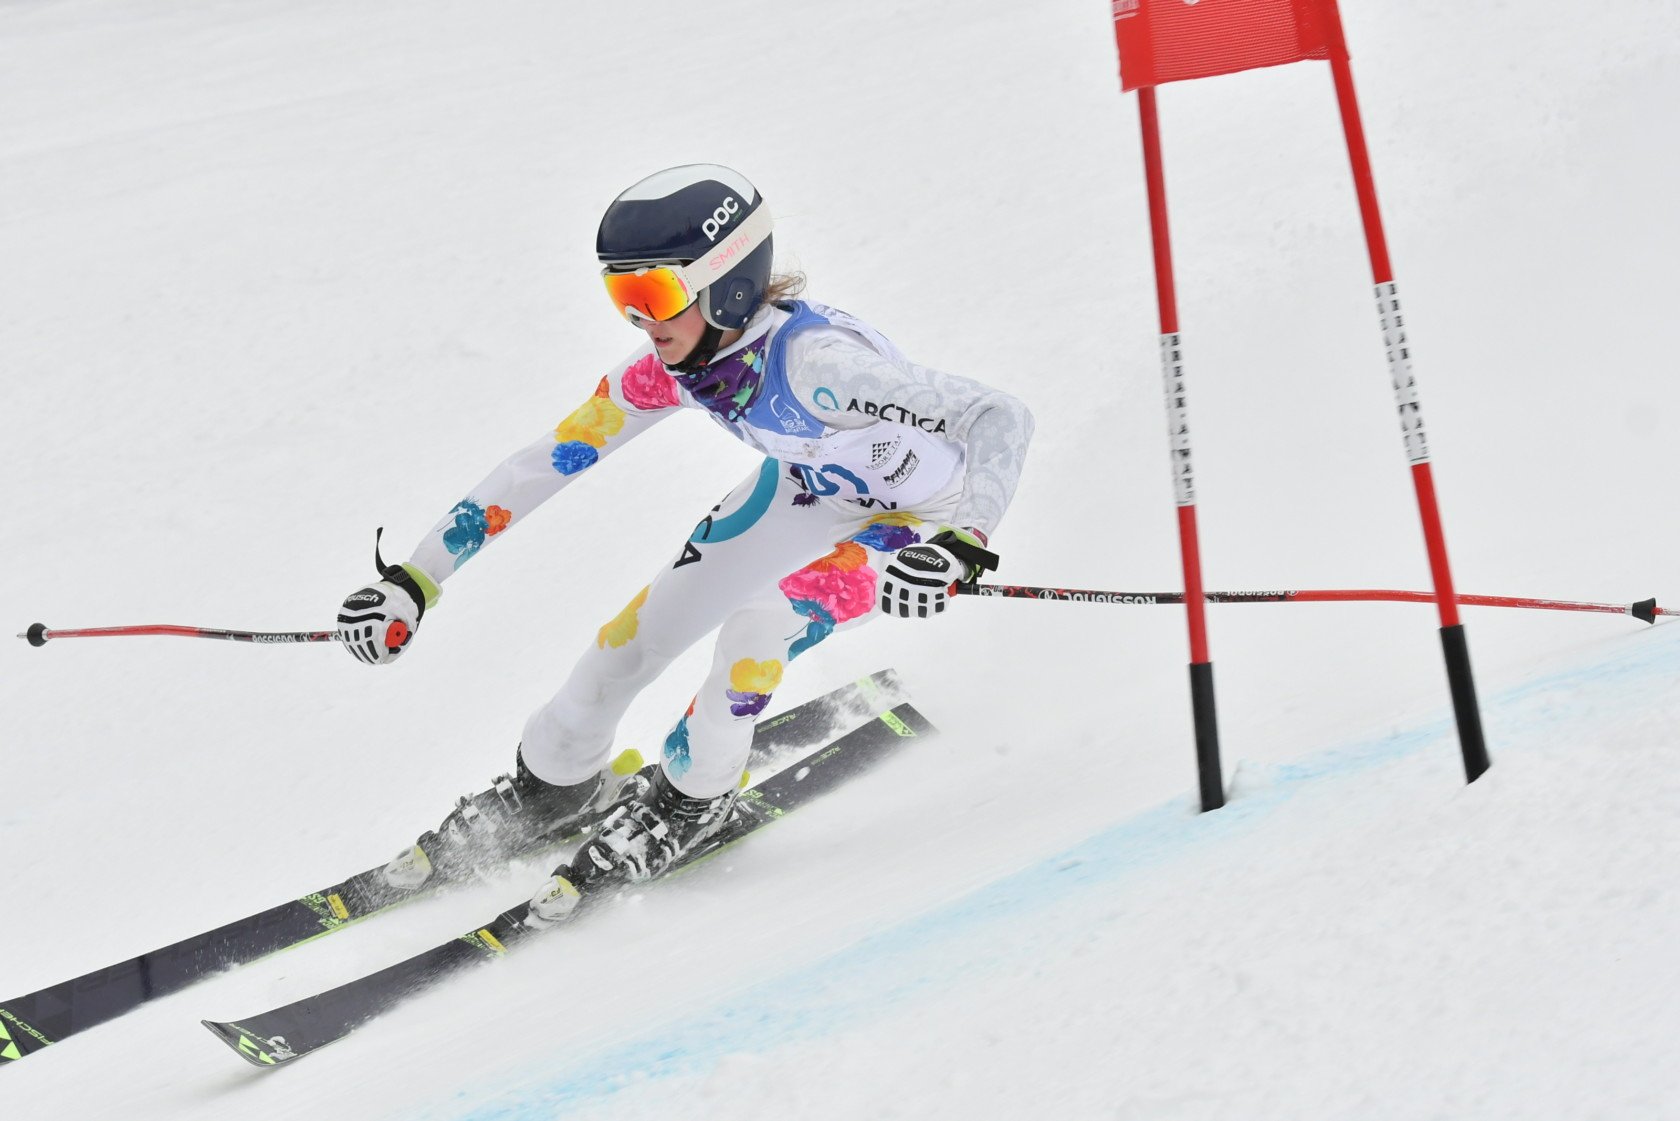 Another best selling ski racing suit for girls is the Arctica GS Speed Suits Flowers White.